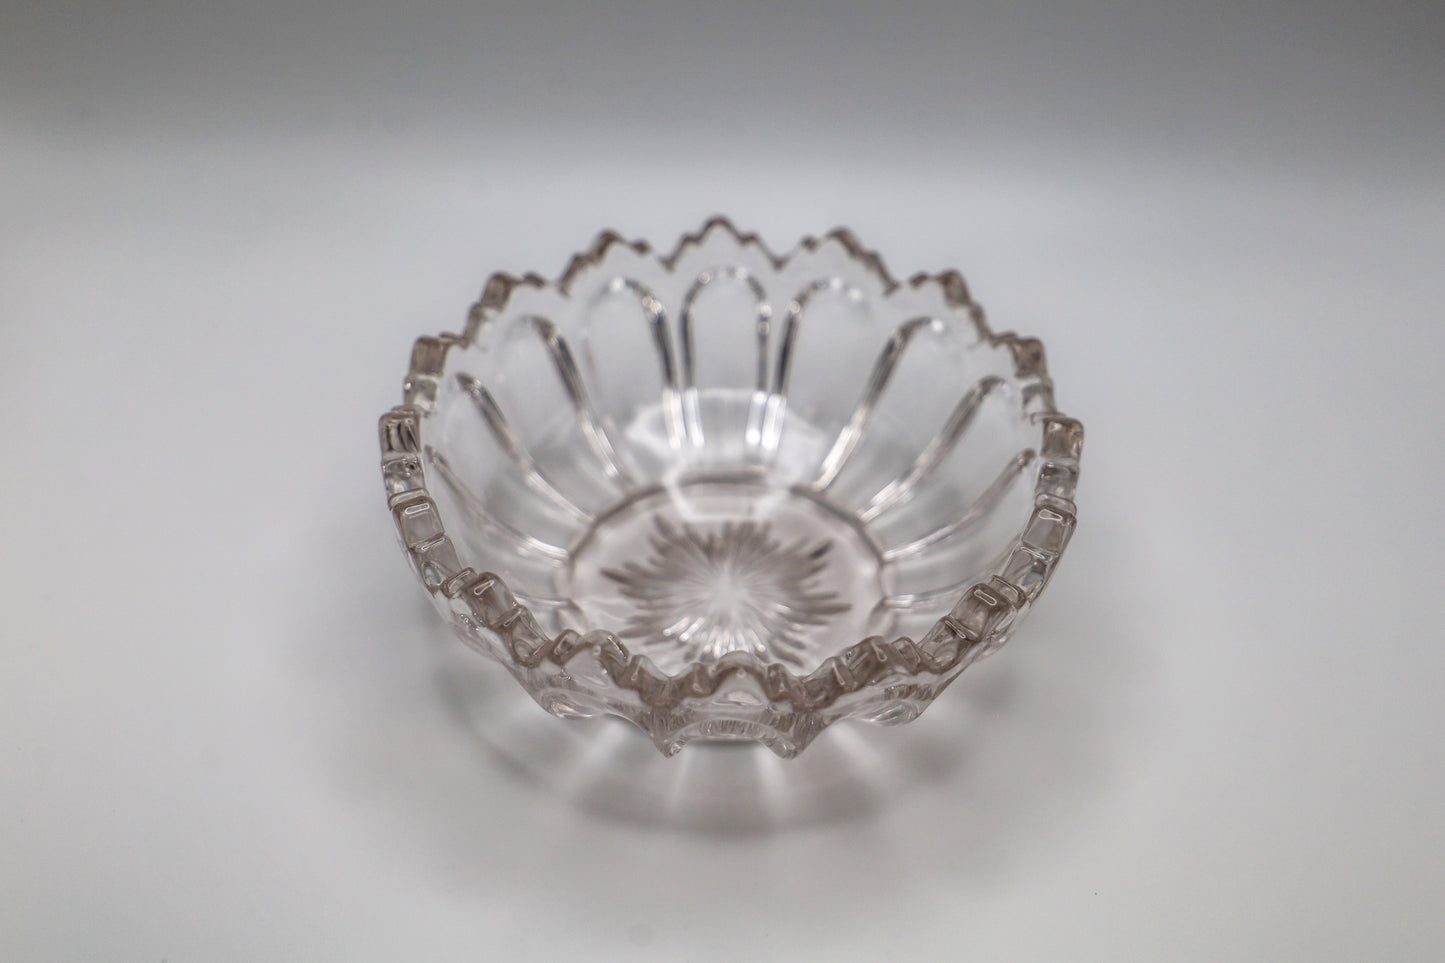 Small cut glass fruit bowl, including a nice starburst pattern in the bottom and the shape of the sides is reminiscent of Moroccan design